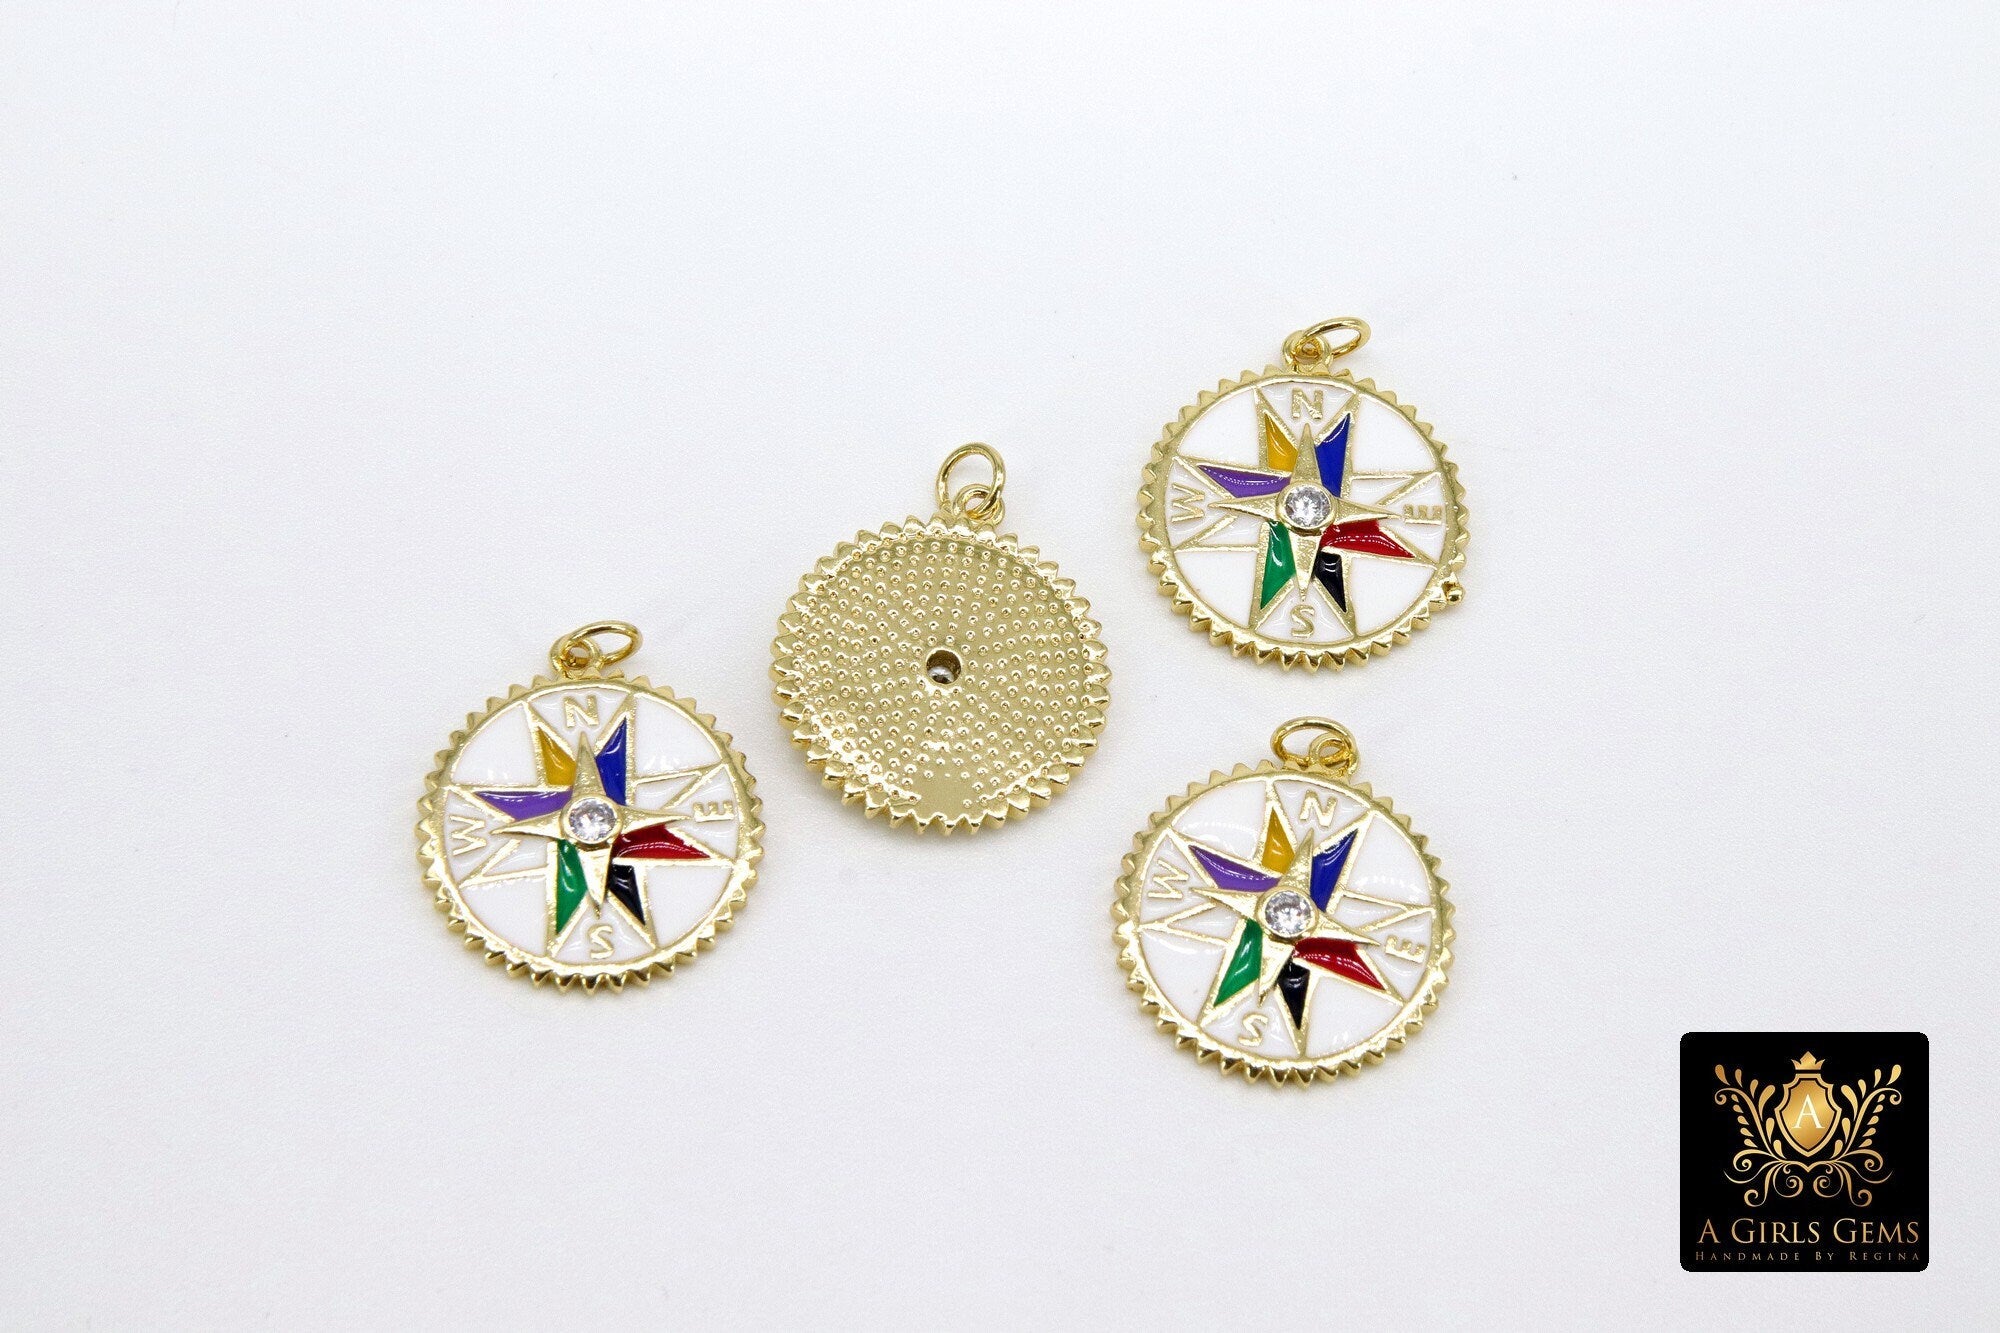 Directional Compass Charms, White and Gold CZ Pave Round Rainbow Multi-Color Disc #481, Enamel Charms